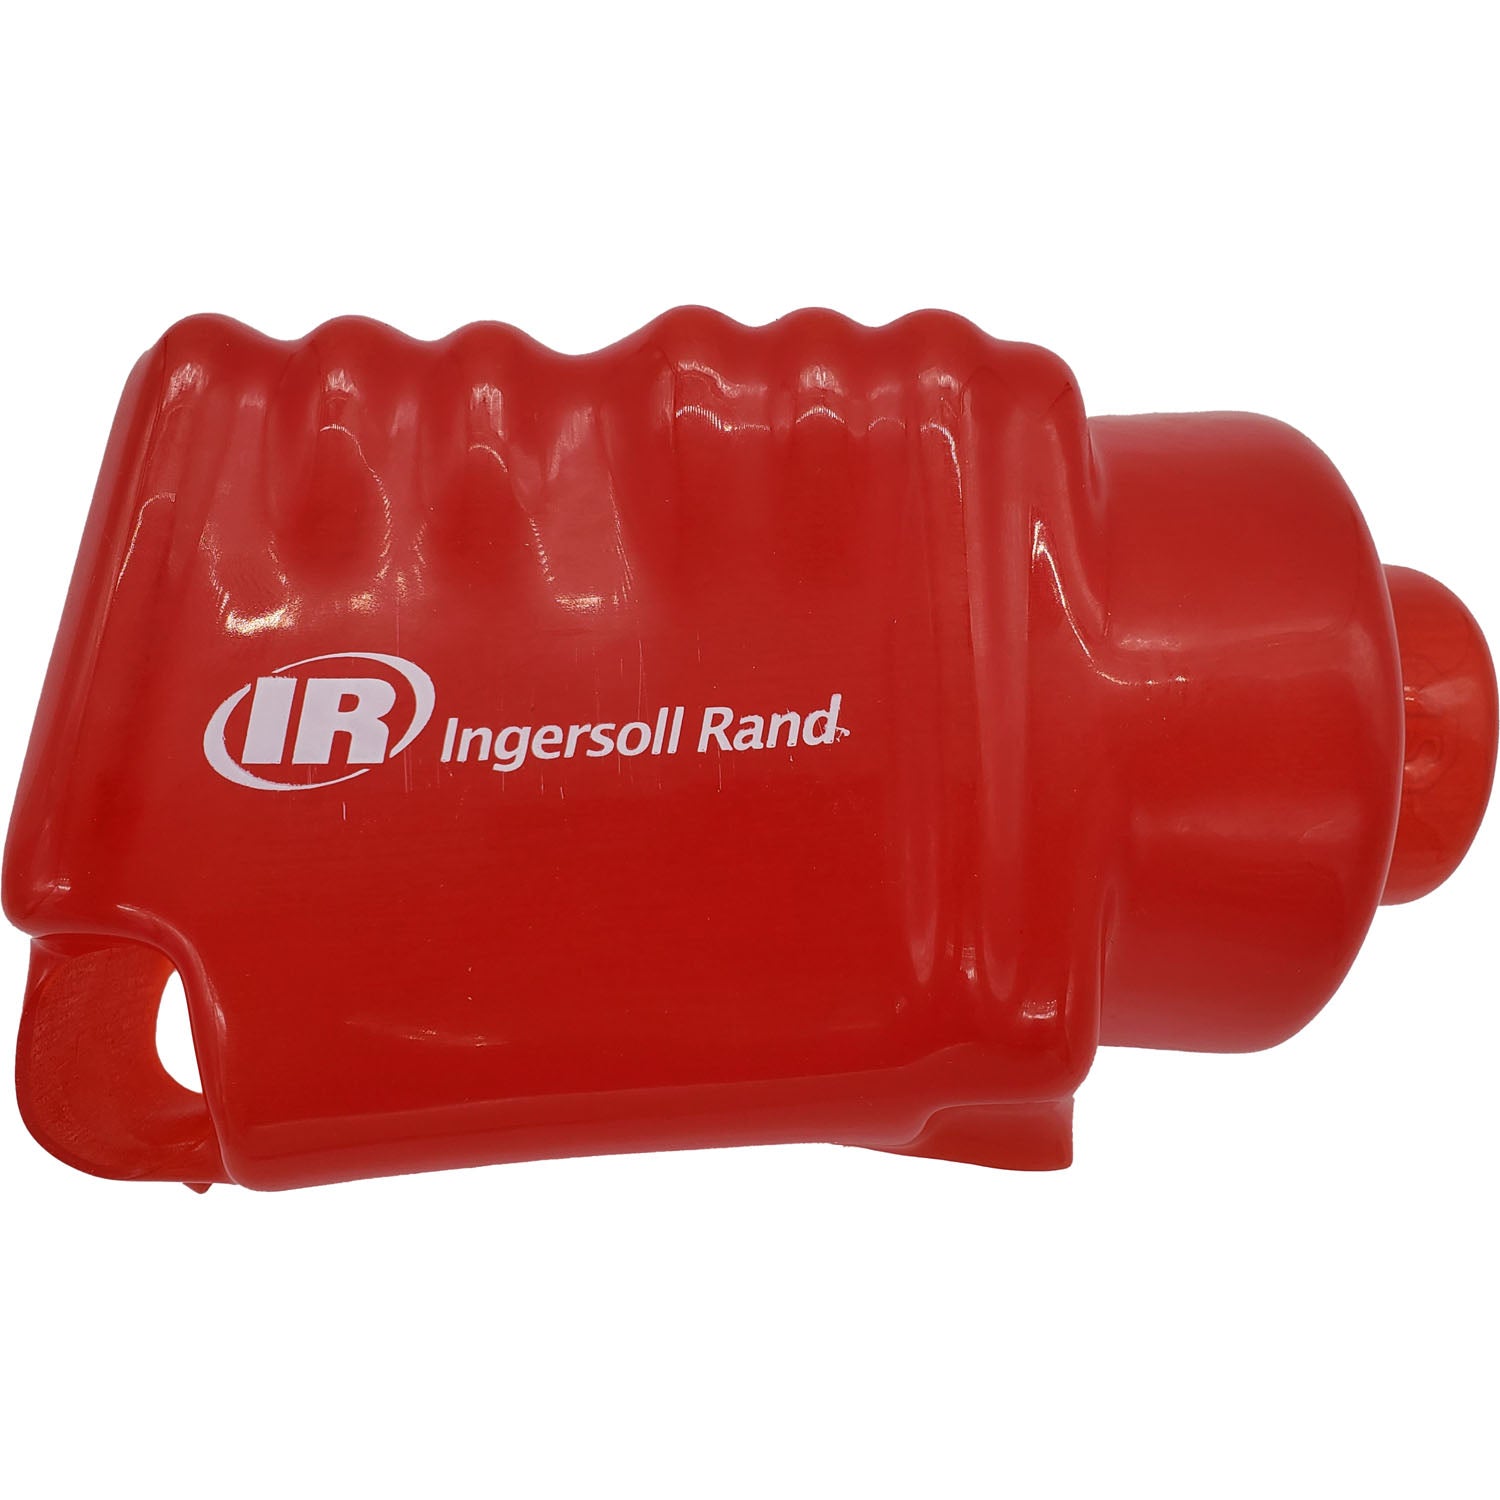 Ingersoll Rand 261-BOOT Protective Cover for 261 Series Impact Wrench